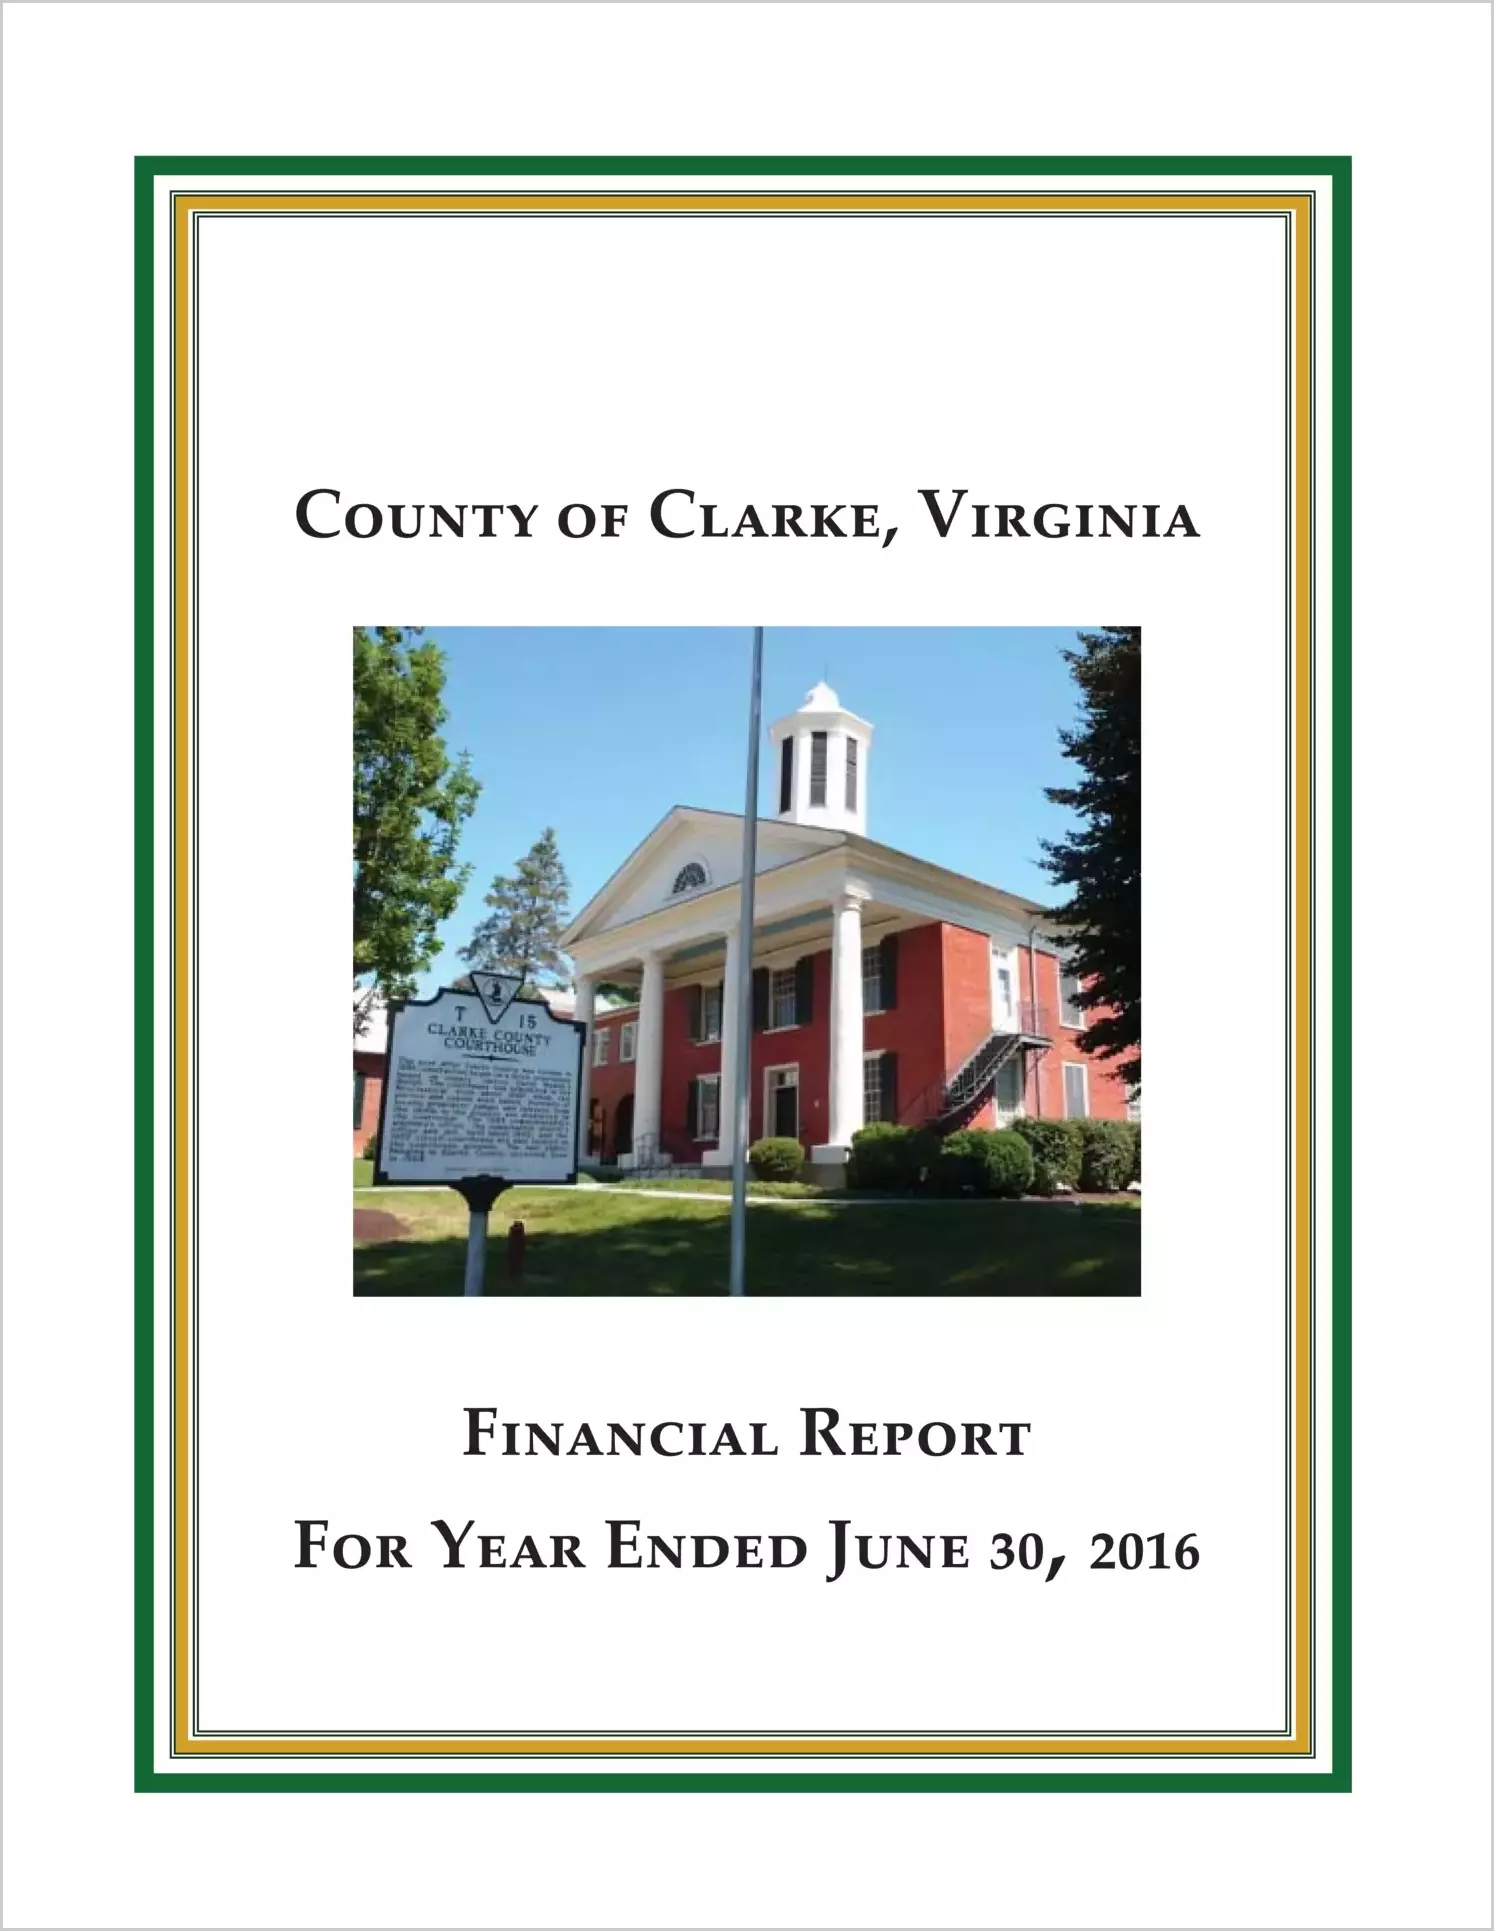 2016 Annual Financial Report for County of Clarke